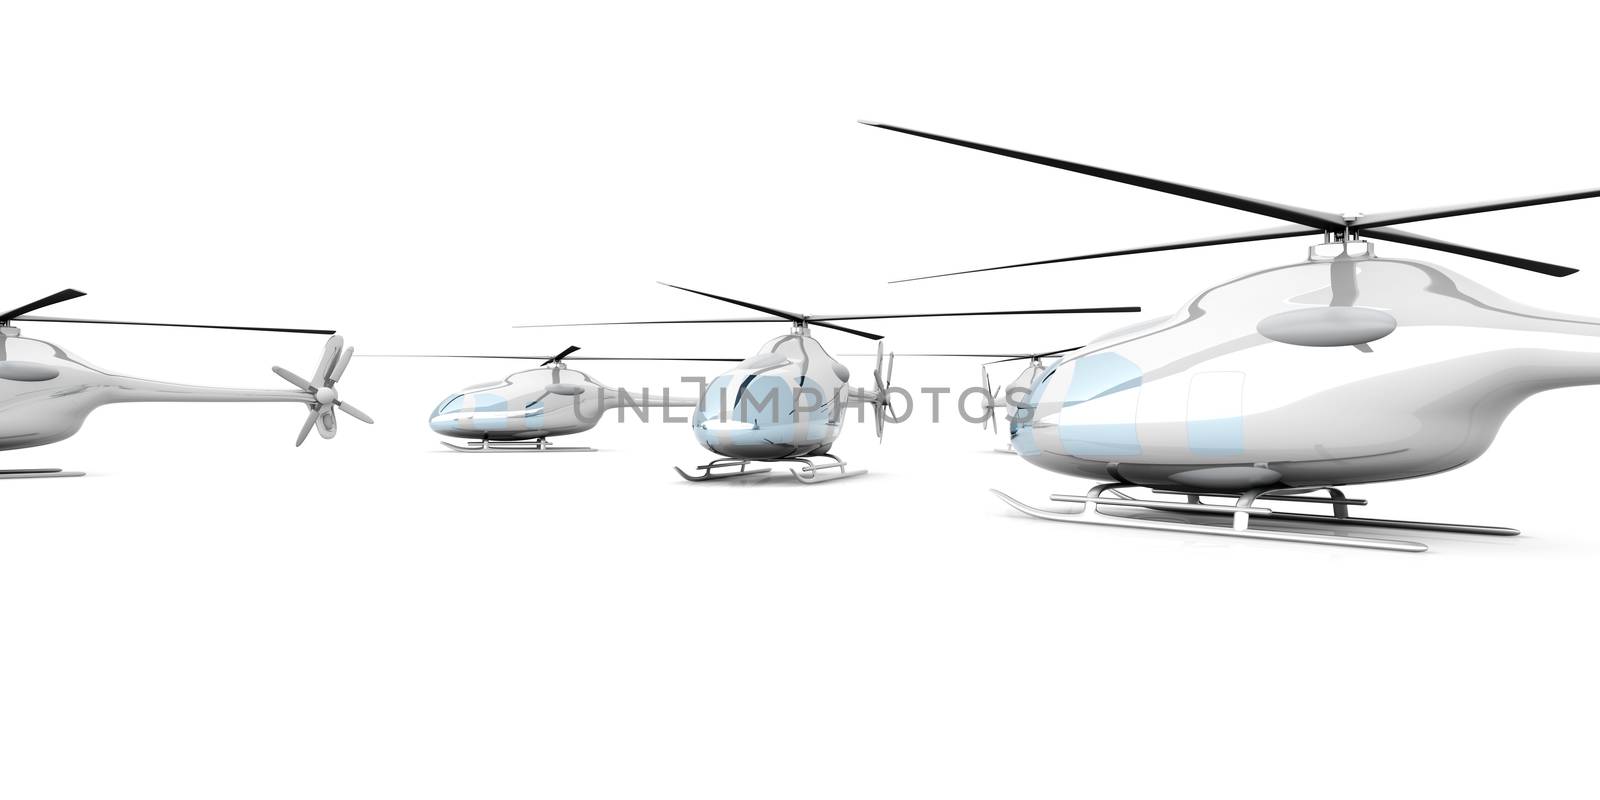 A group of Helicopters by Spectral